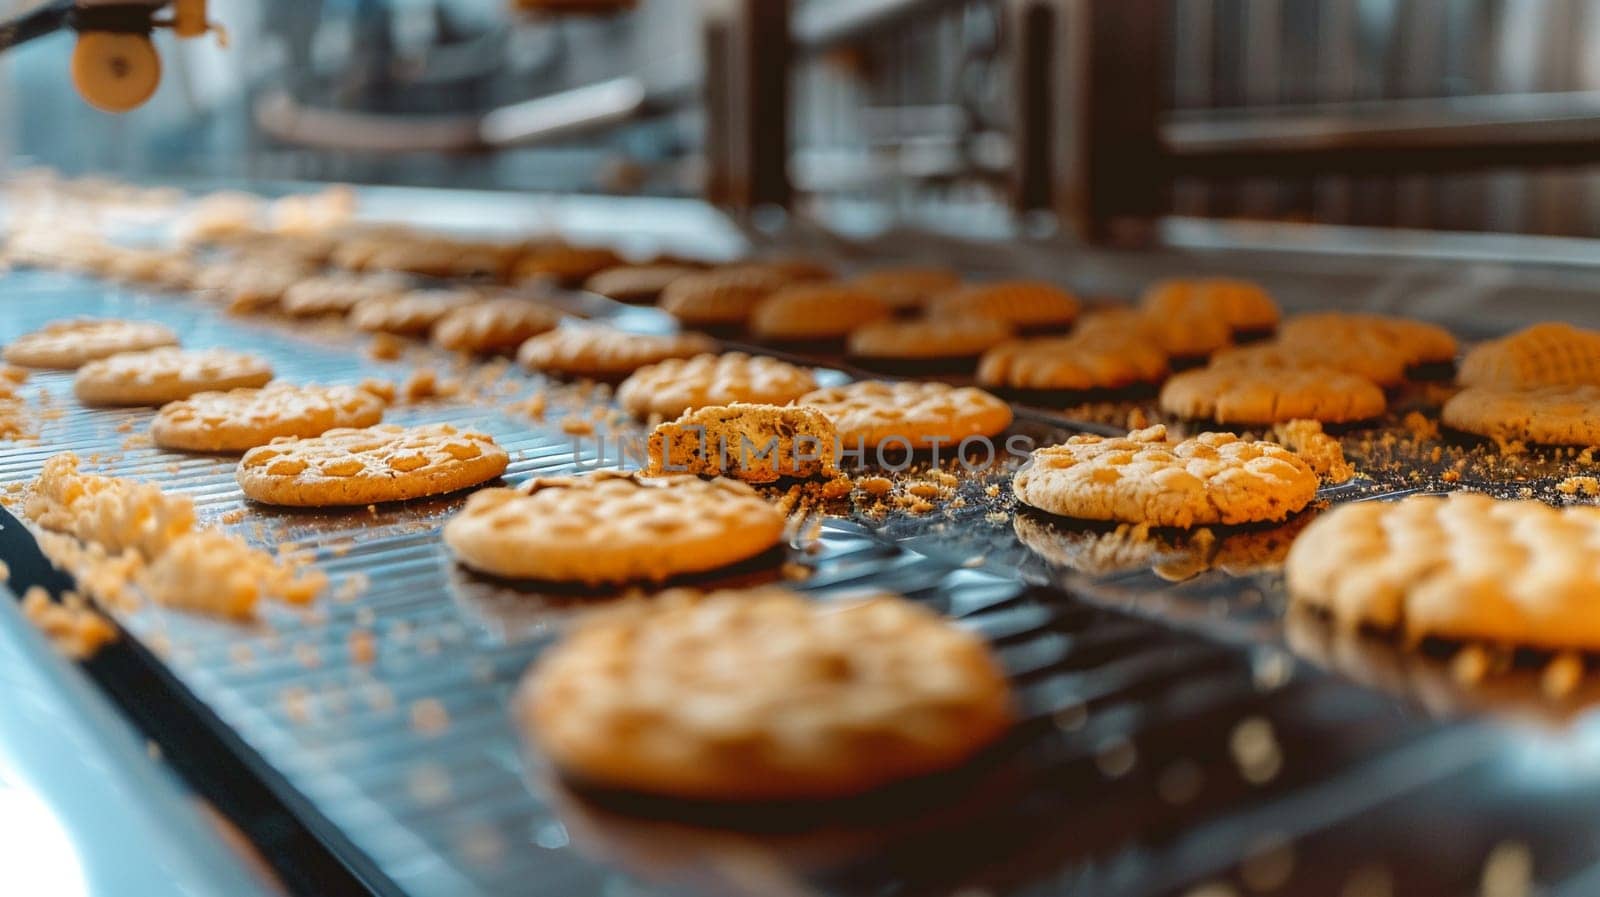 Close-up view of freshly baked cookies on industrial conveyor belt in food production facility, depicting automation and food industry concepts.